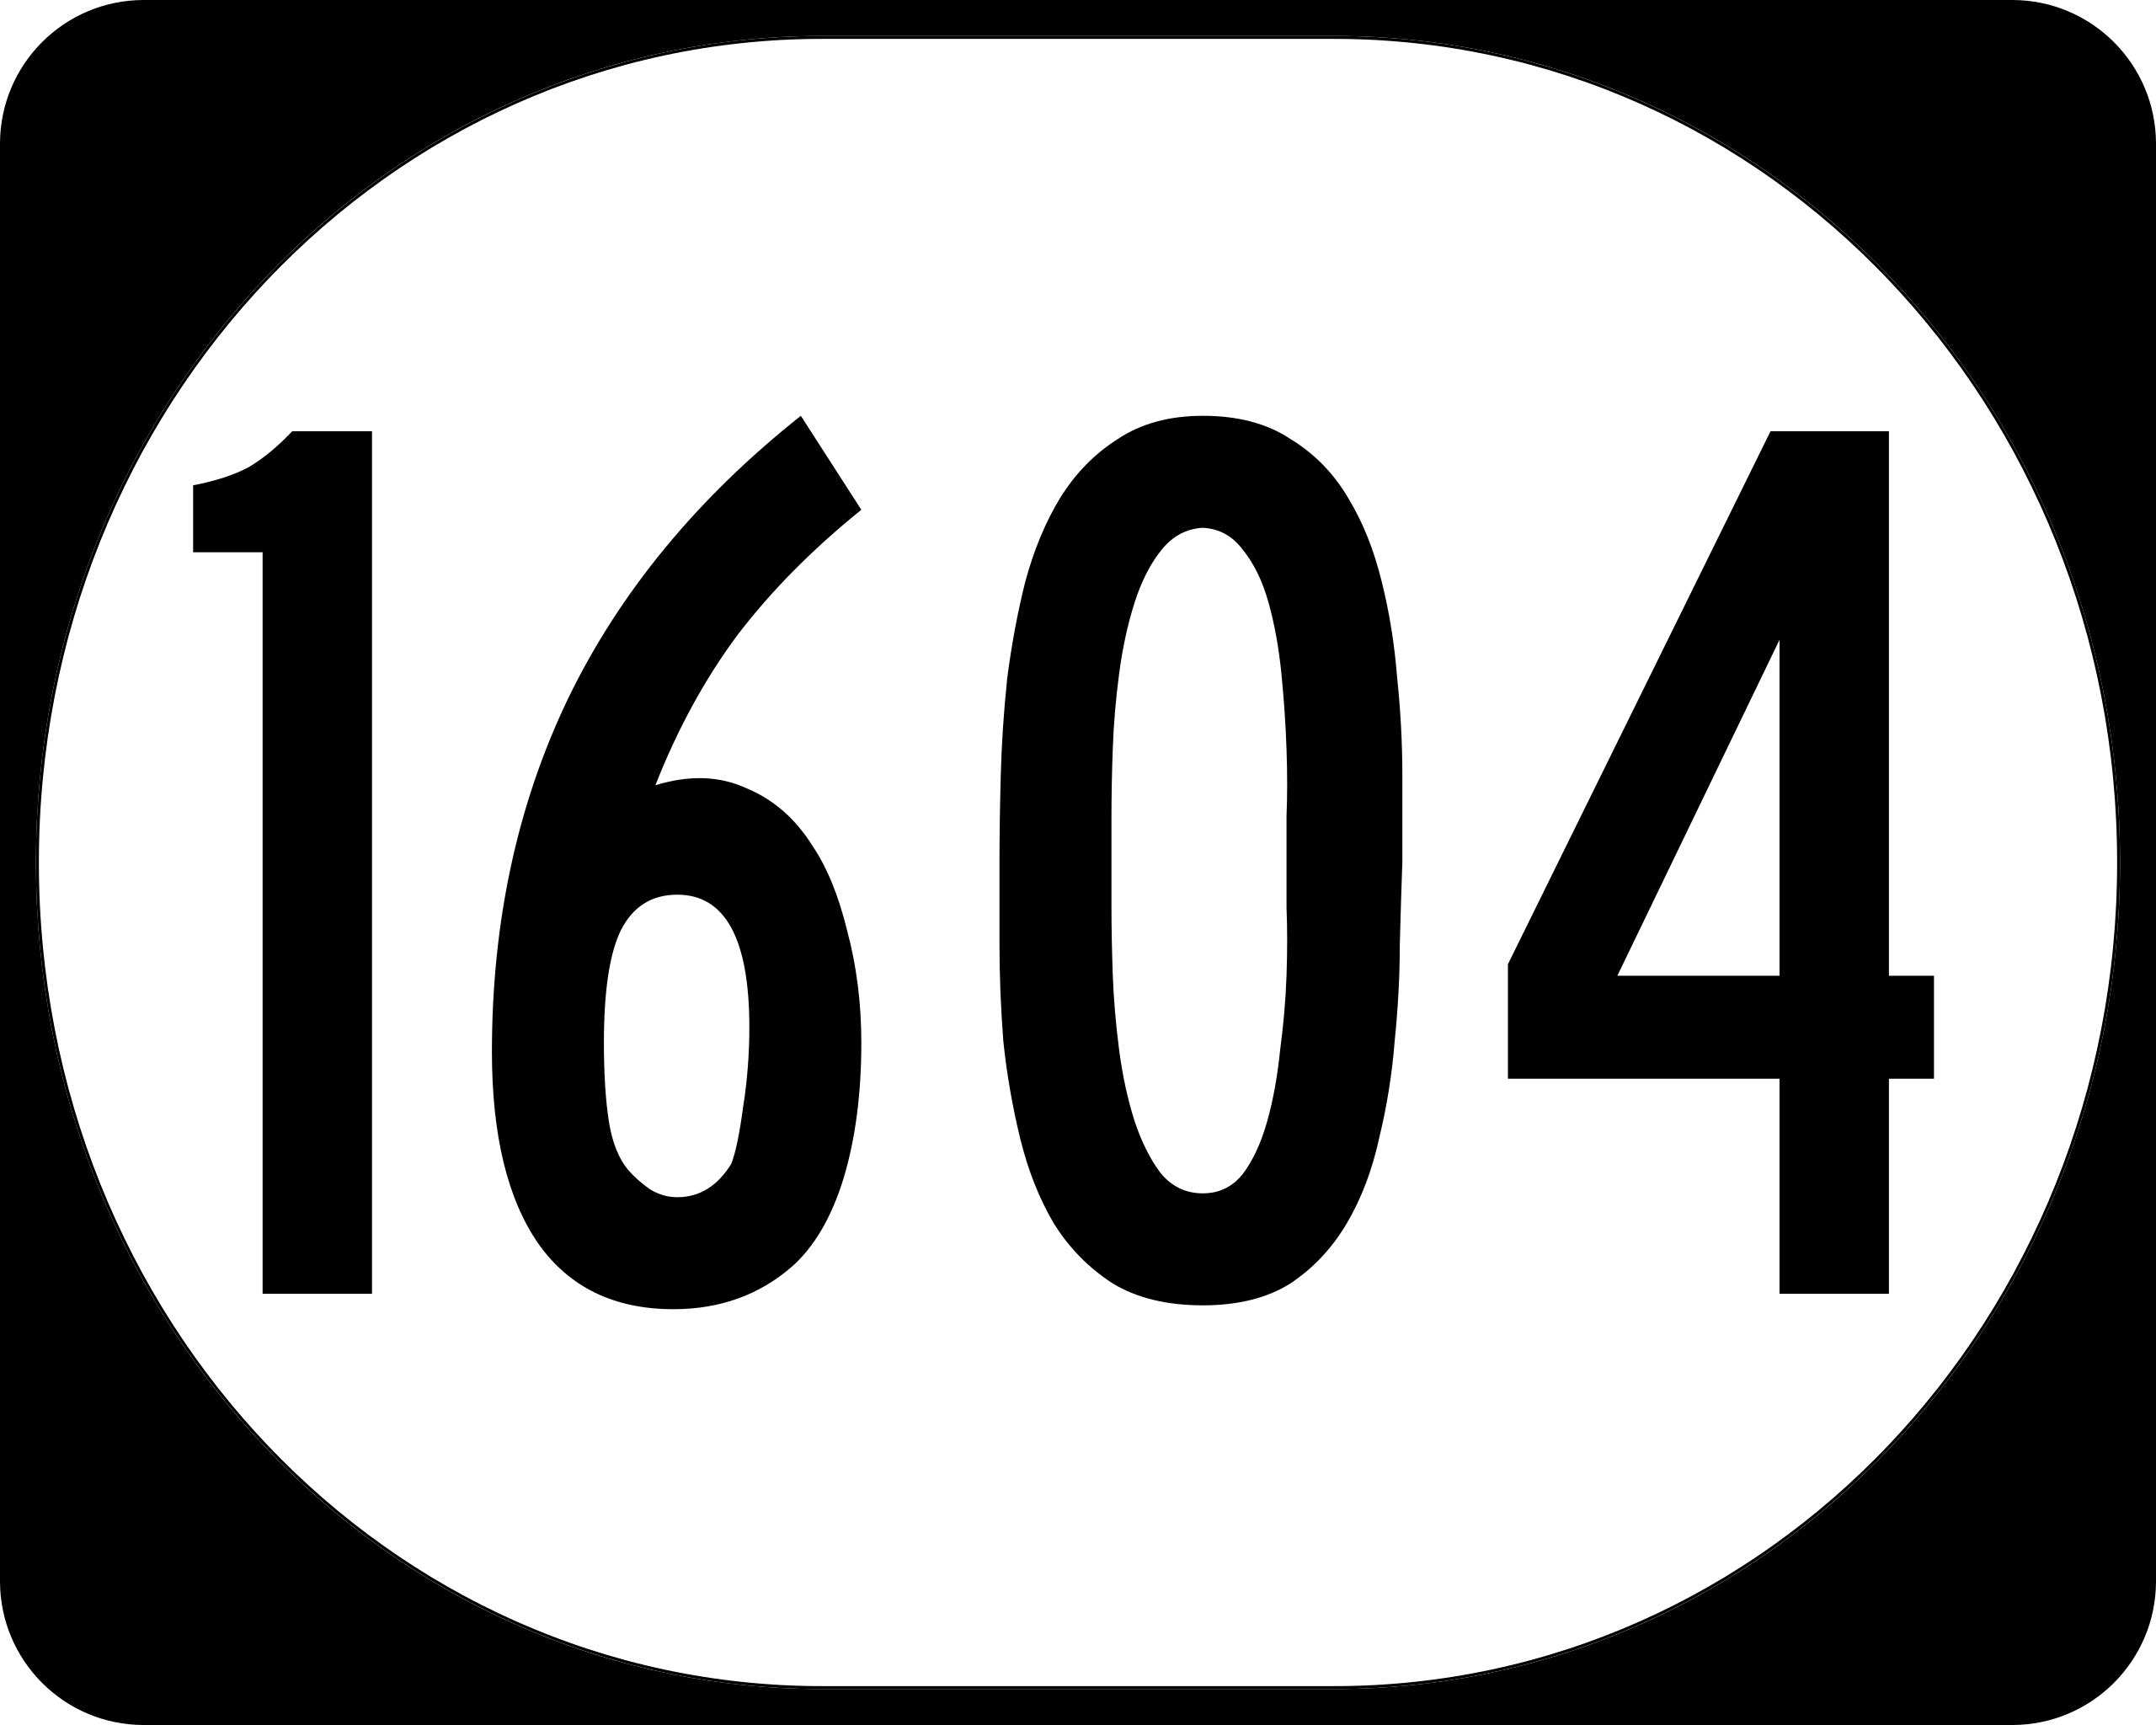 1024 (number) - Wikipedia